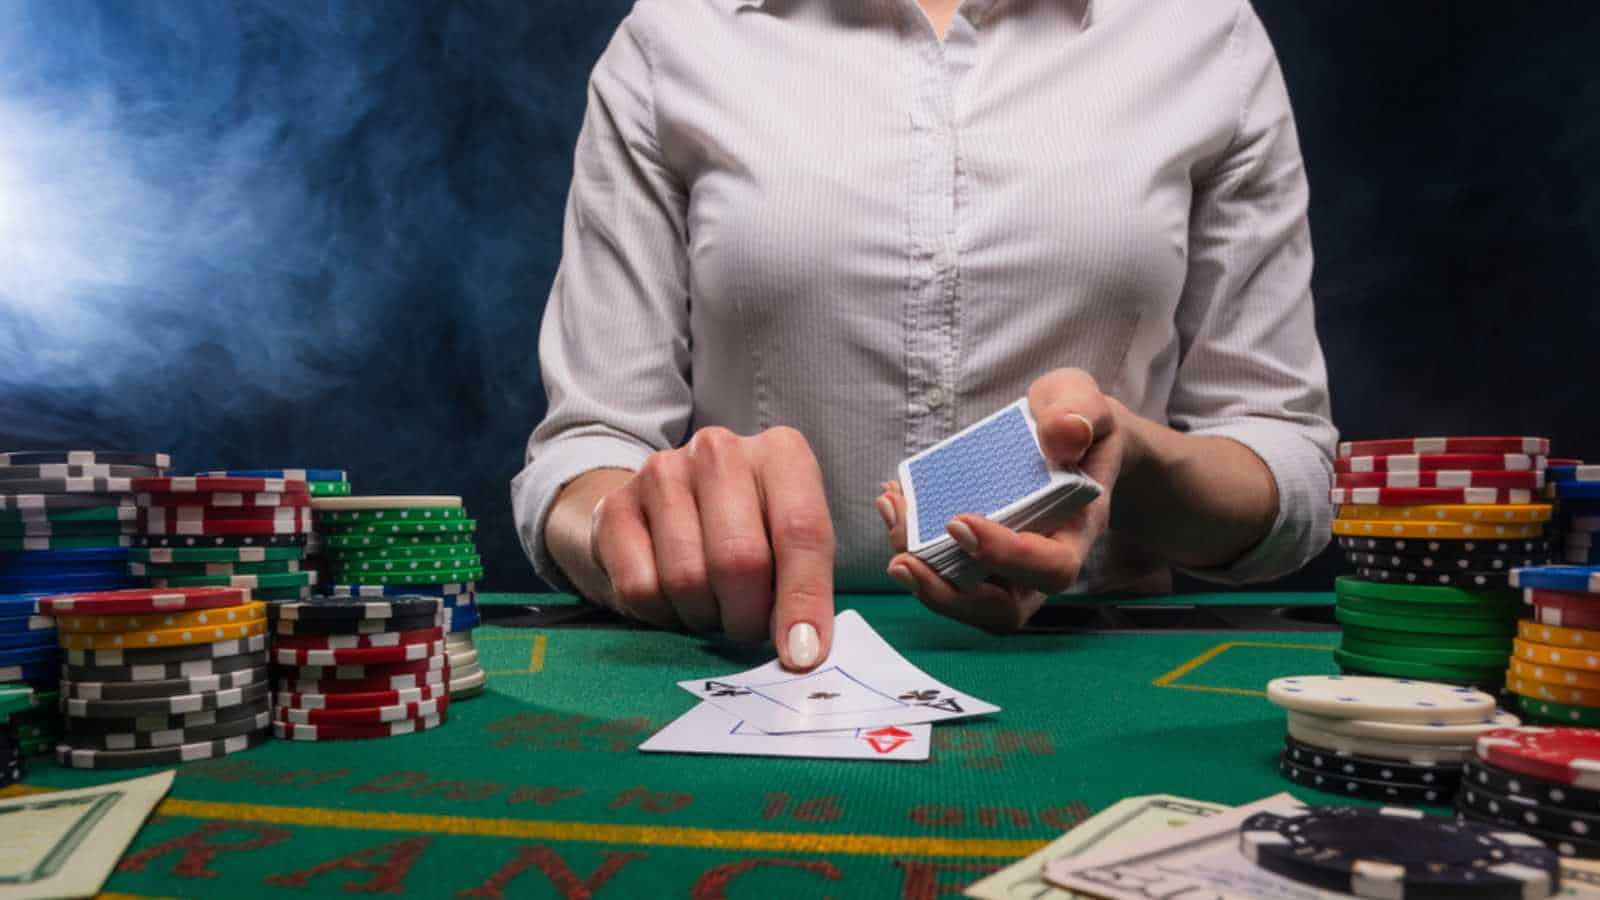 Card Counting in casino